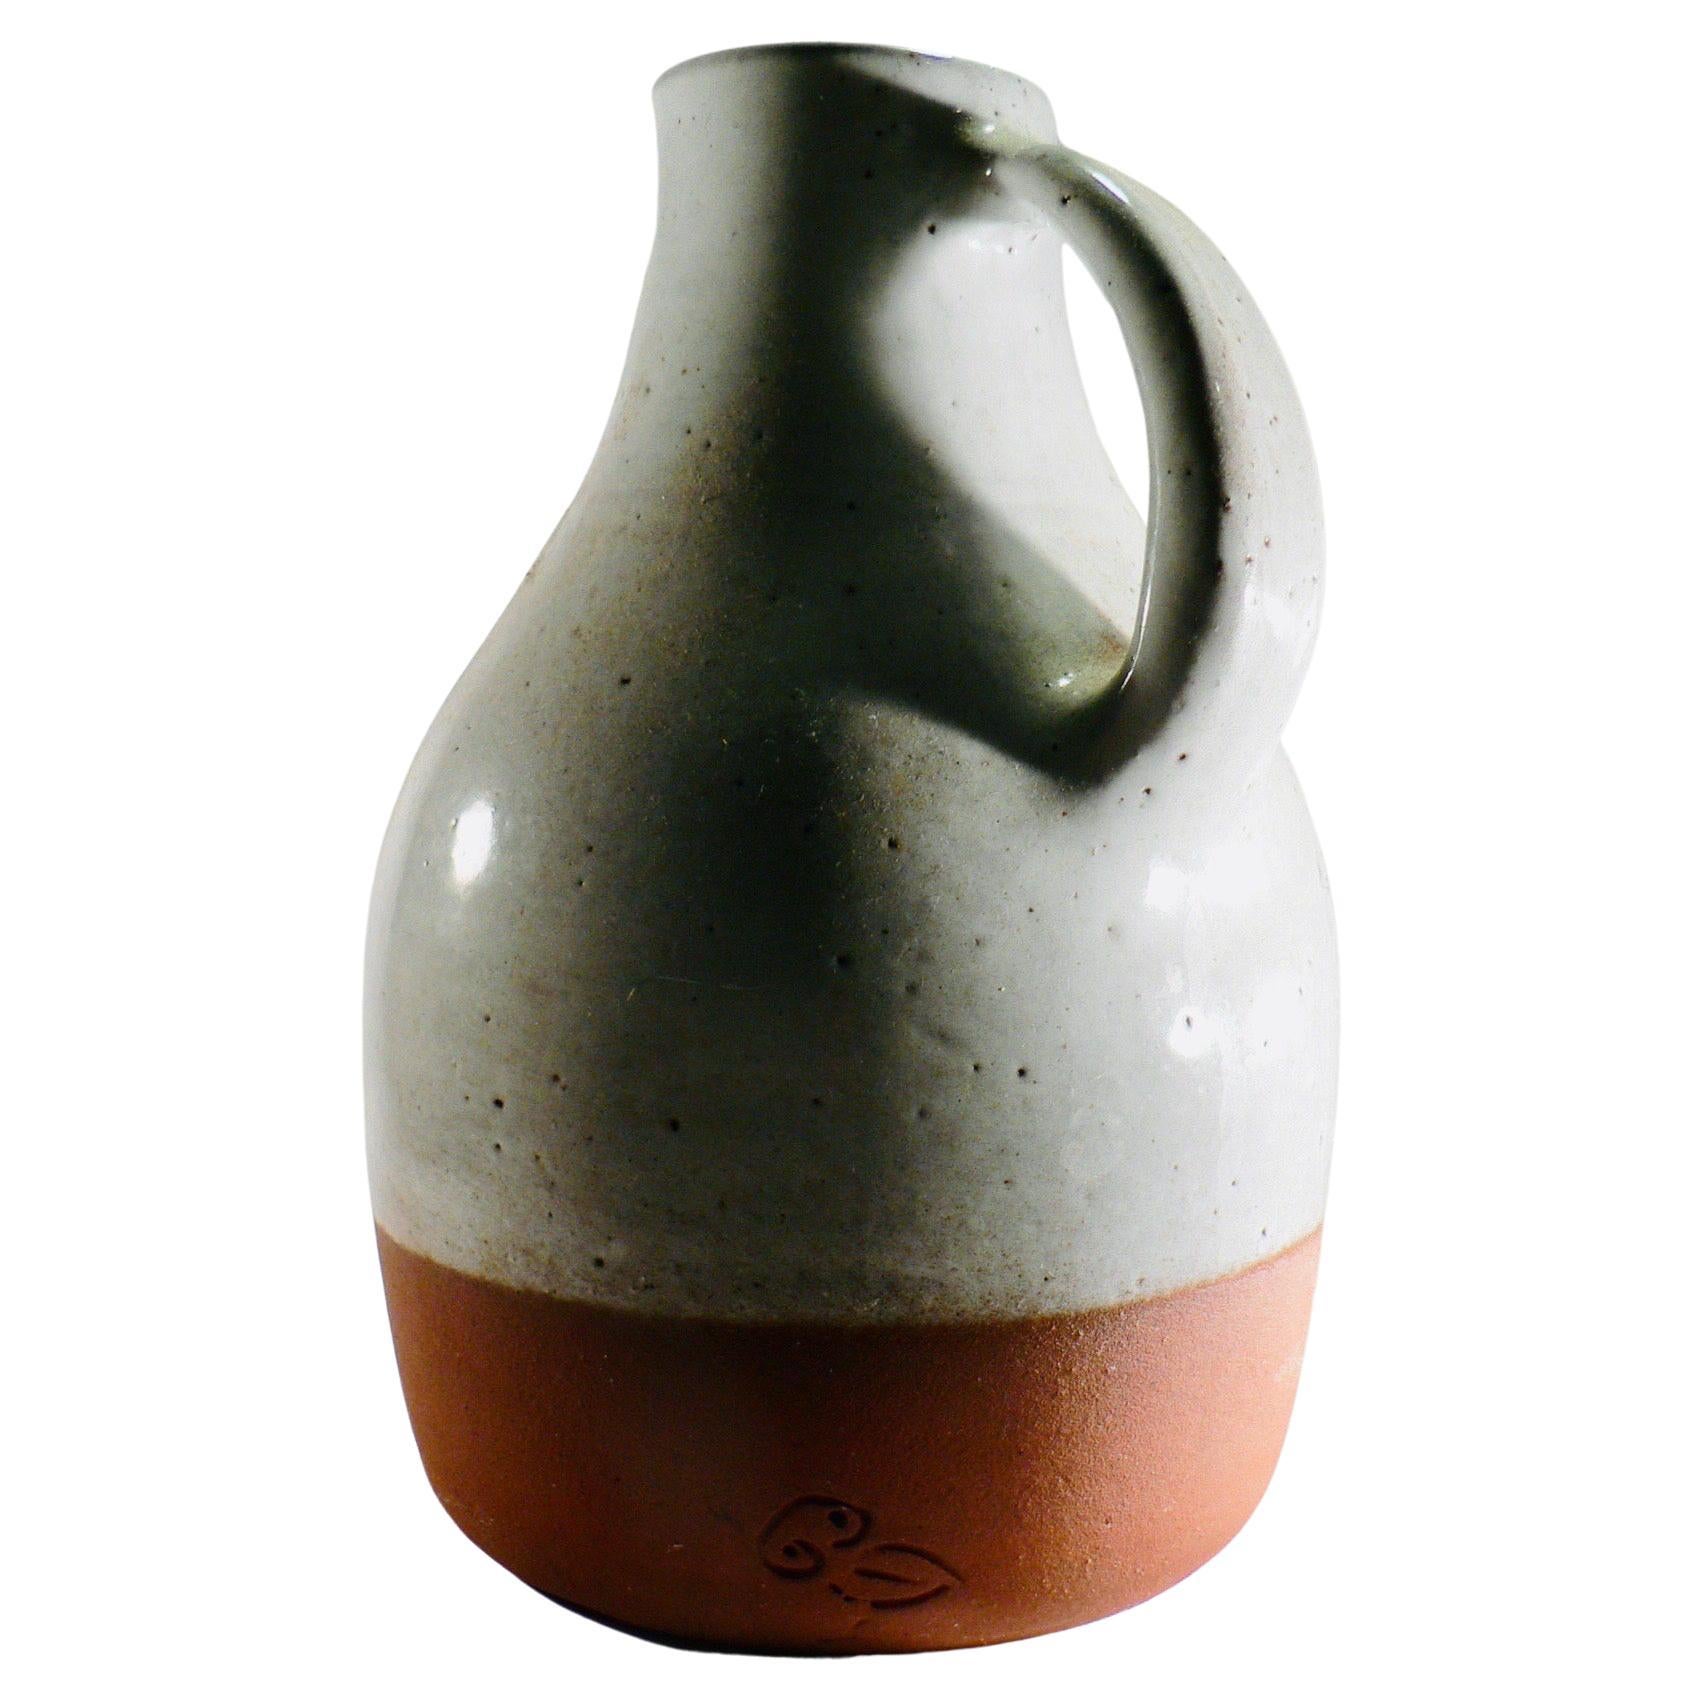 A pitcher in glazed ceramic - Jeanne and Norbert Pierlot - France - 1960s.